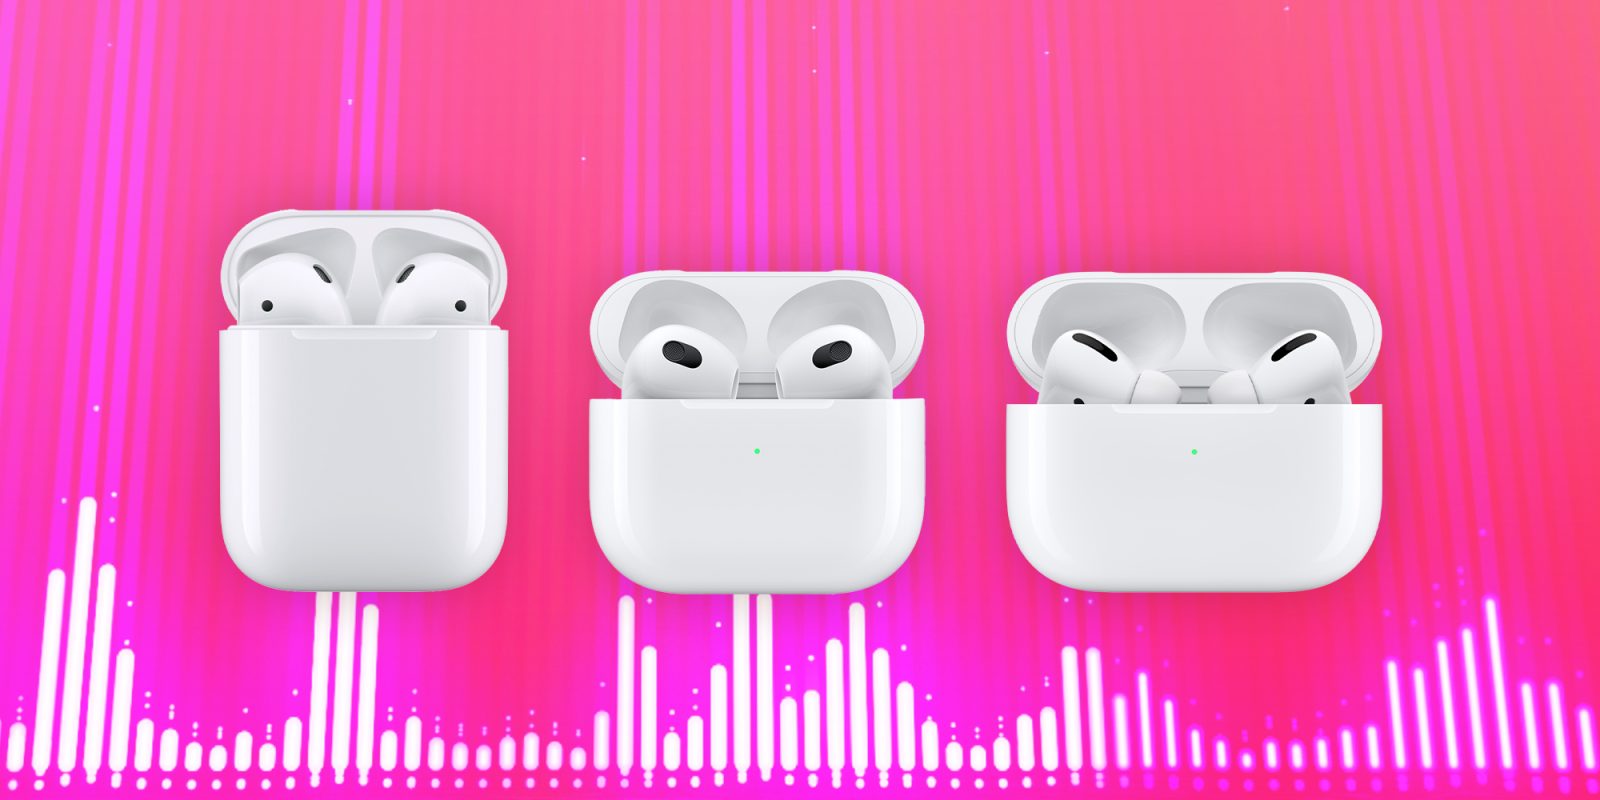 Best AirPods Pro cases of 2021